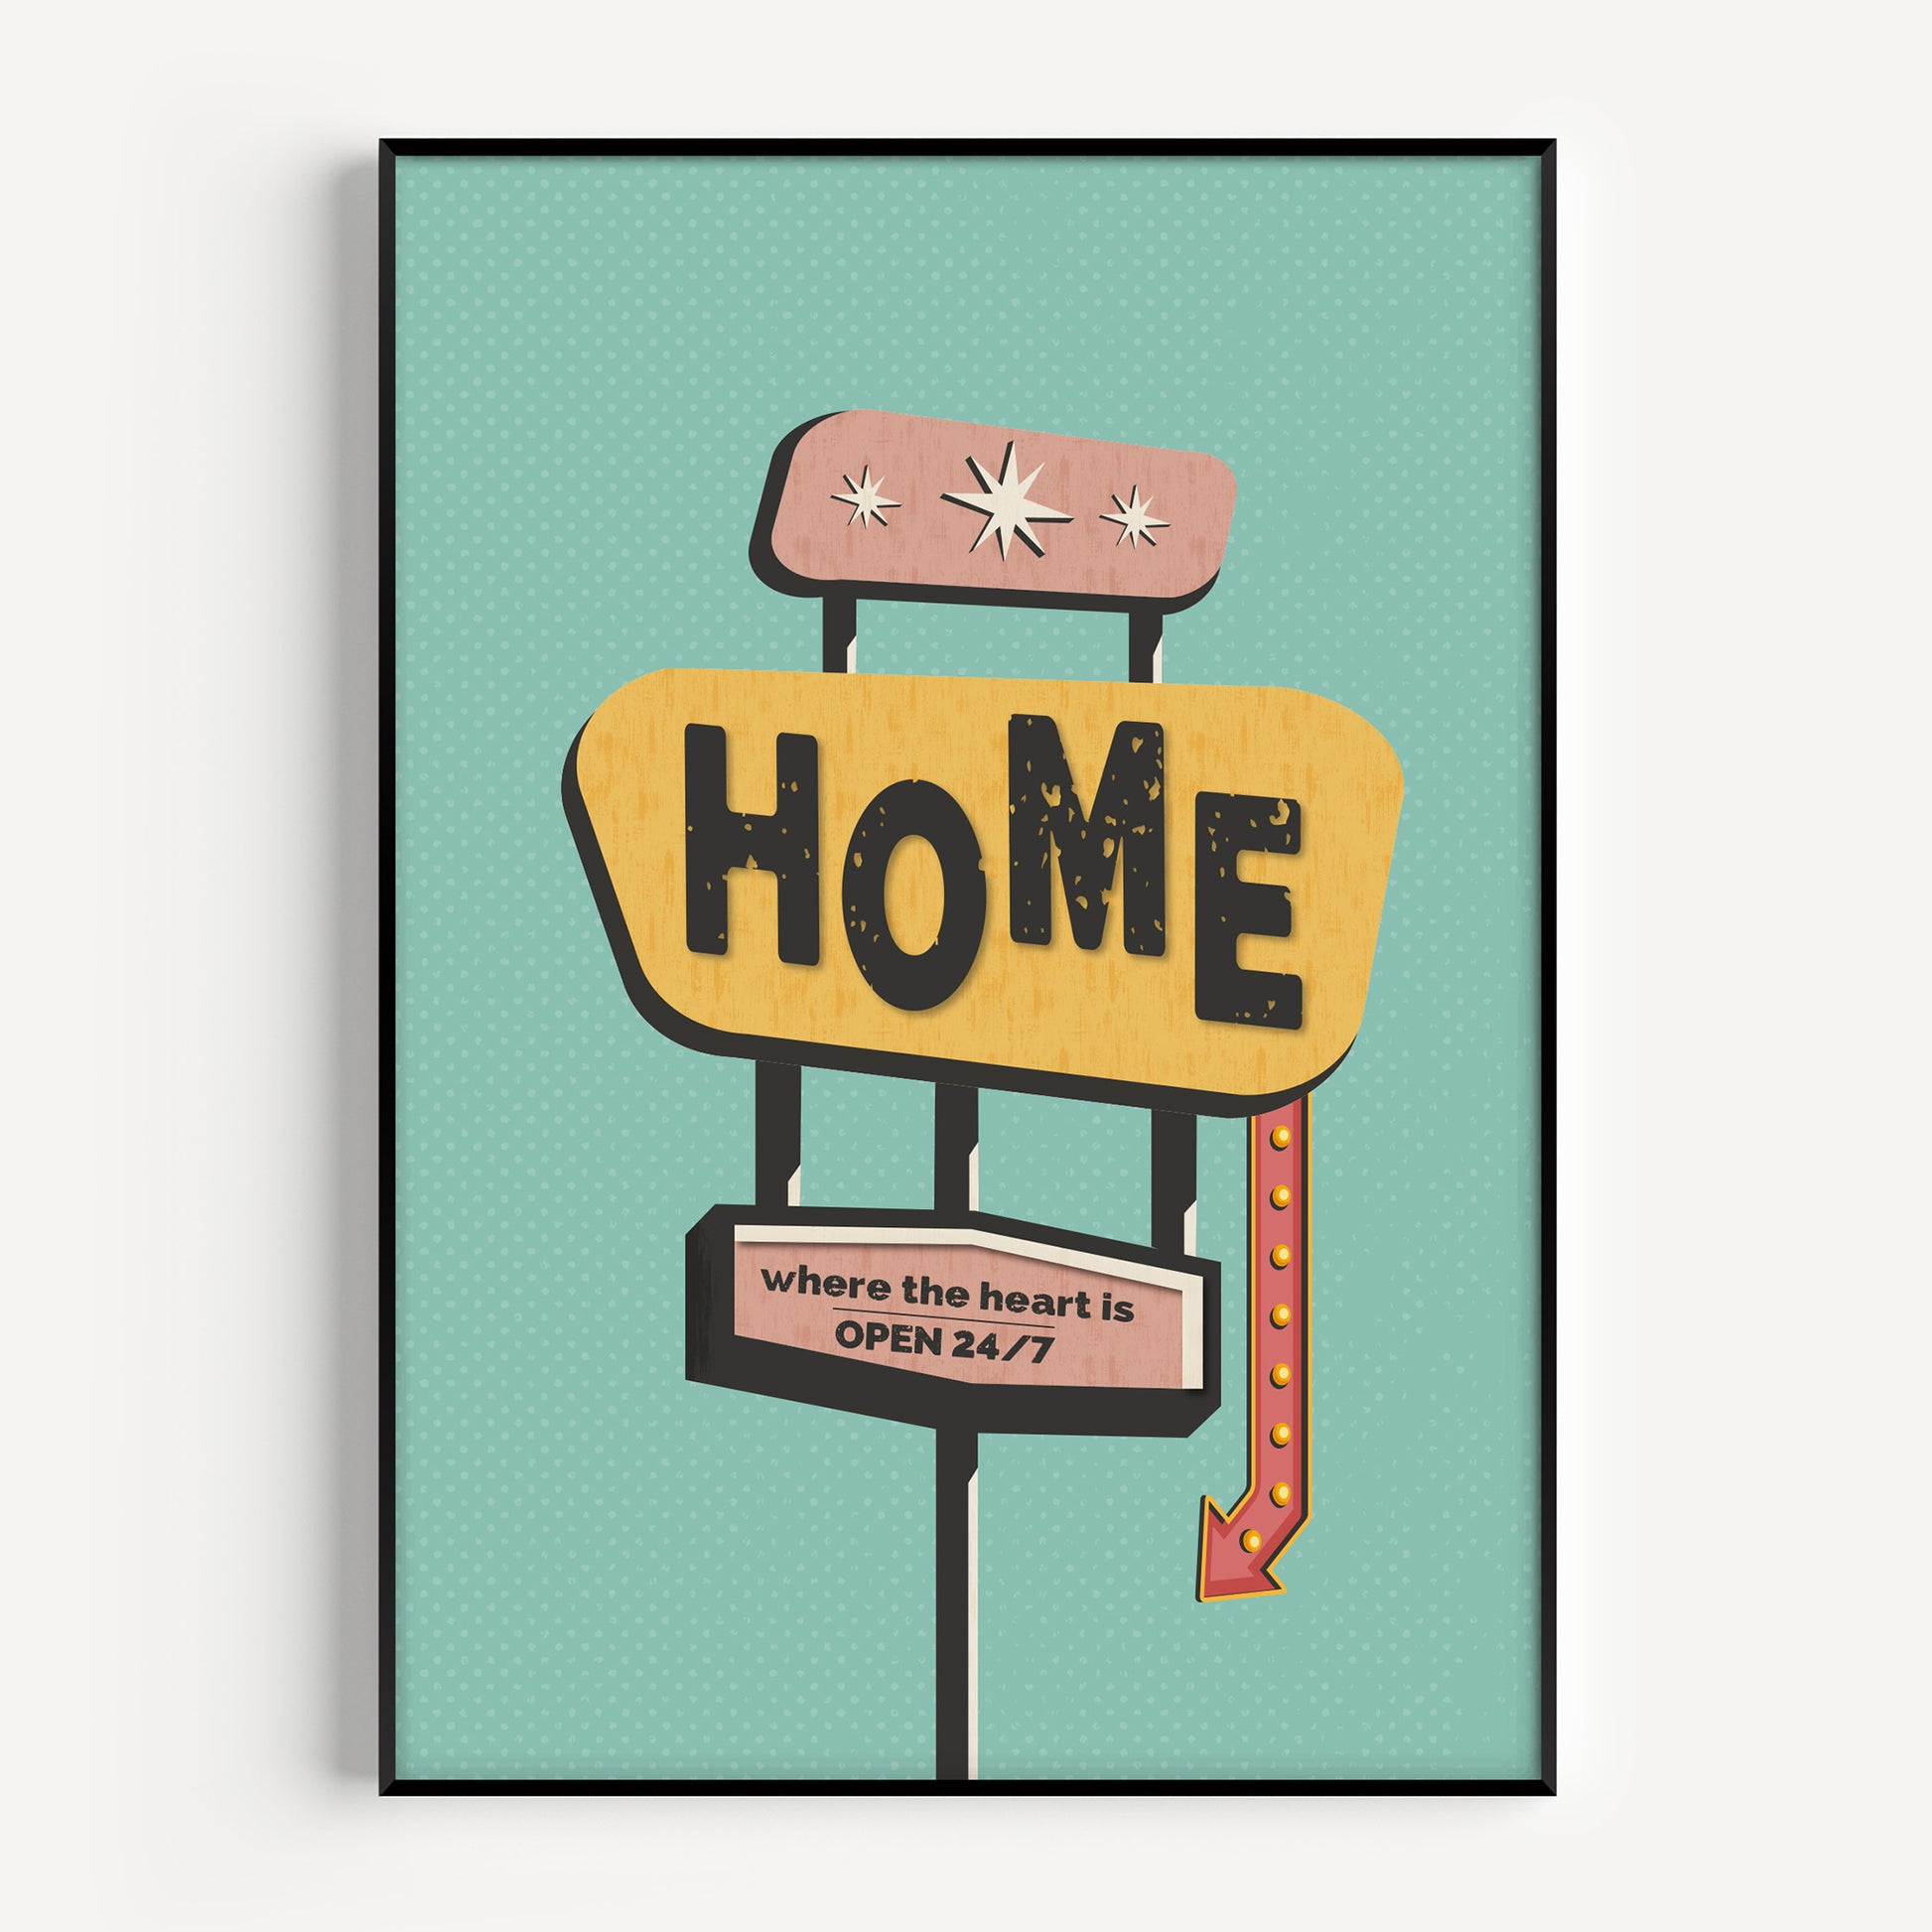 Home sign print, family wall art in a mid century modern style